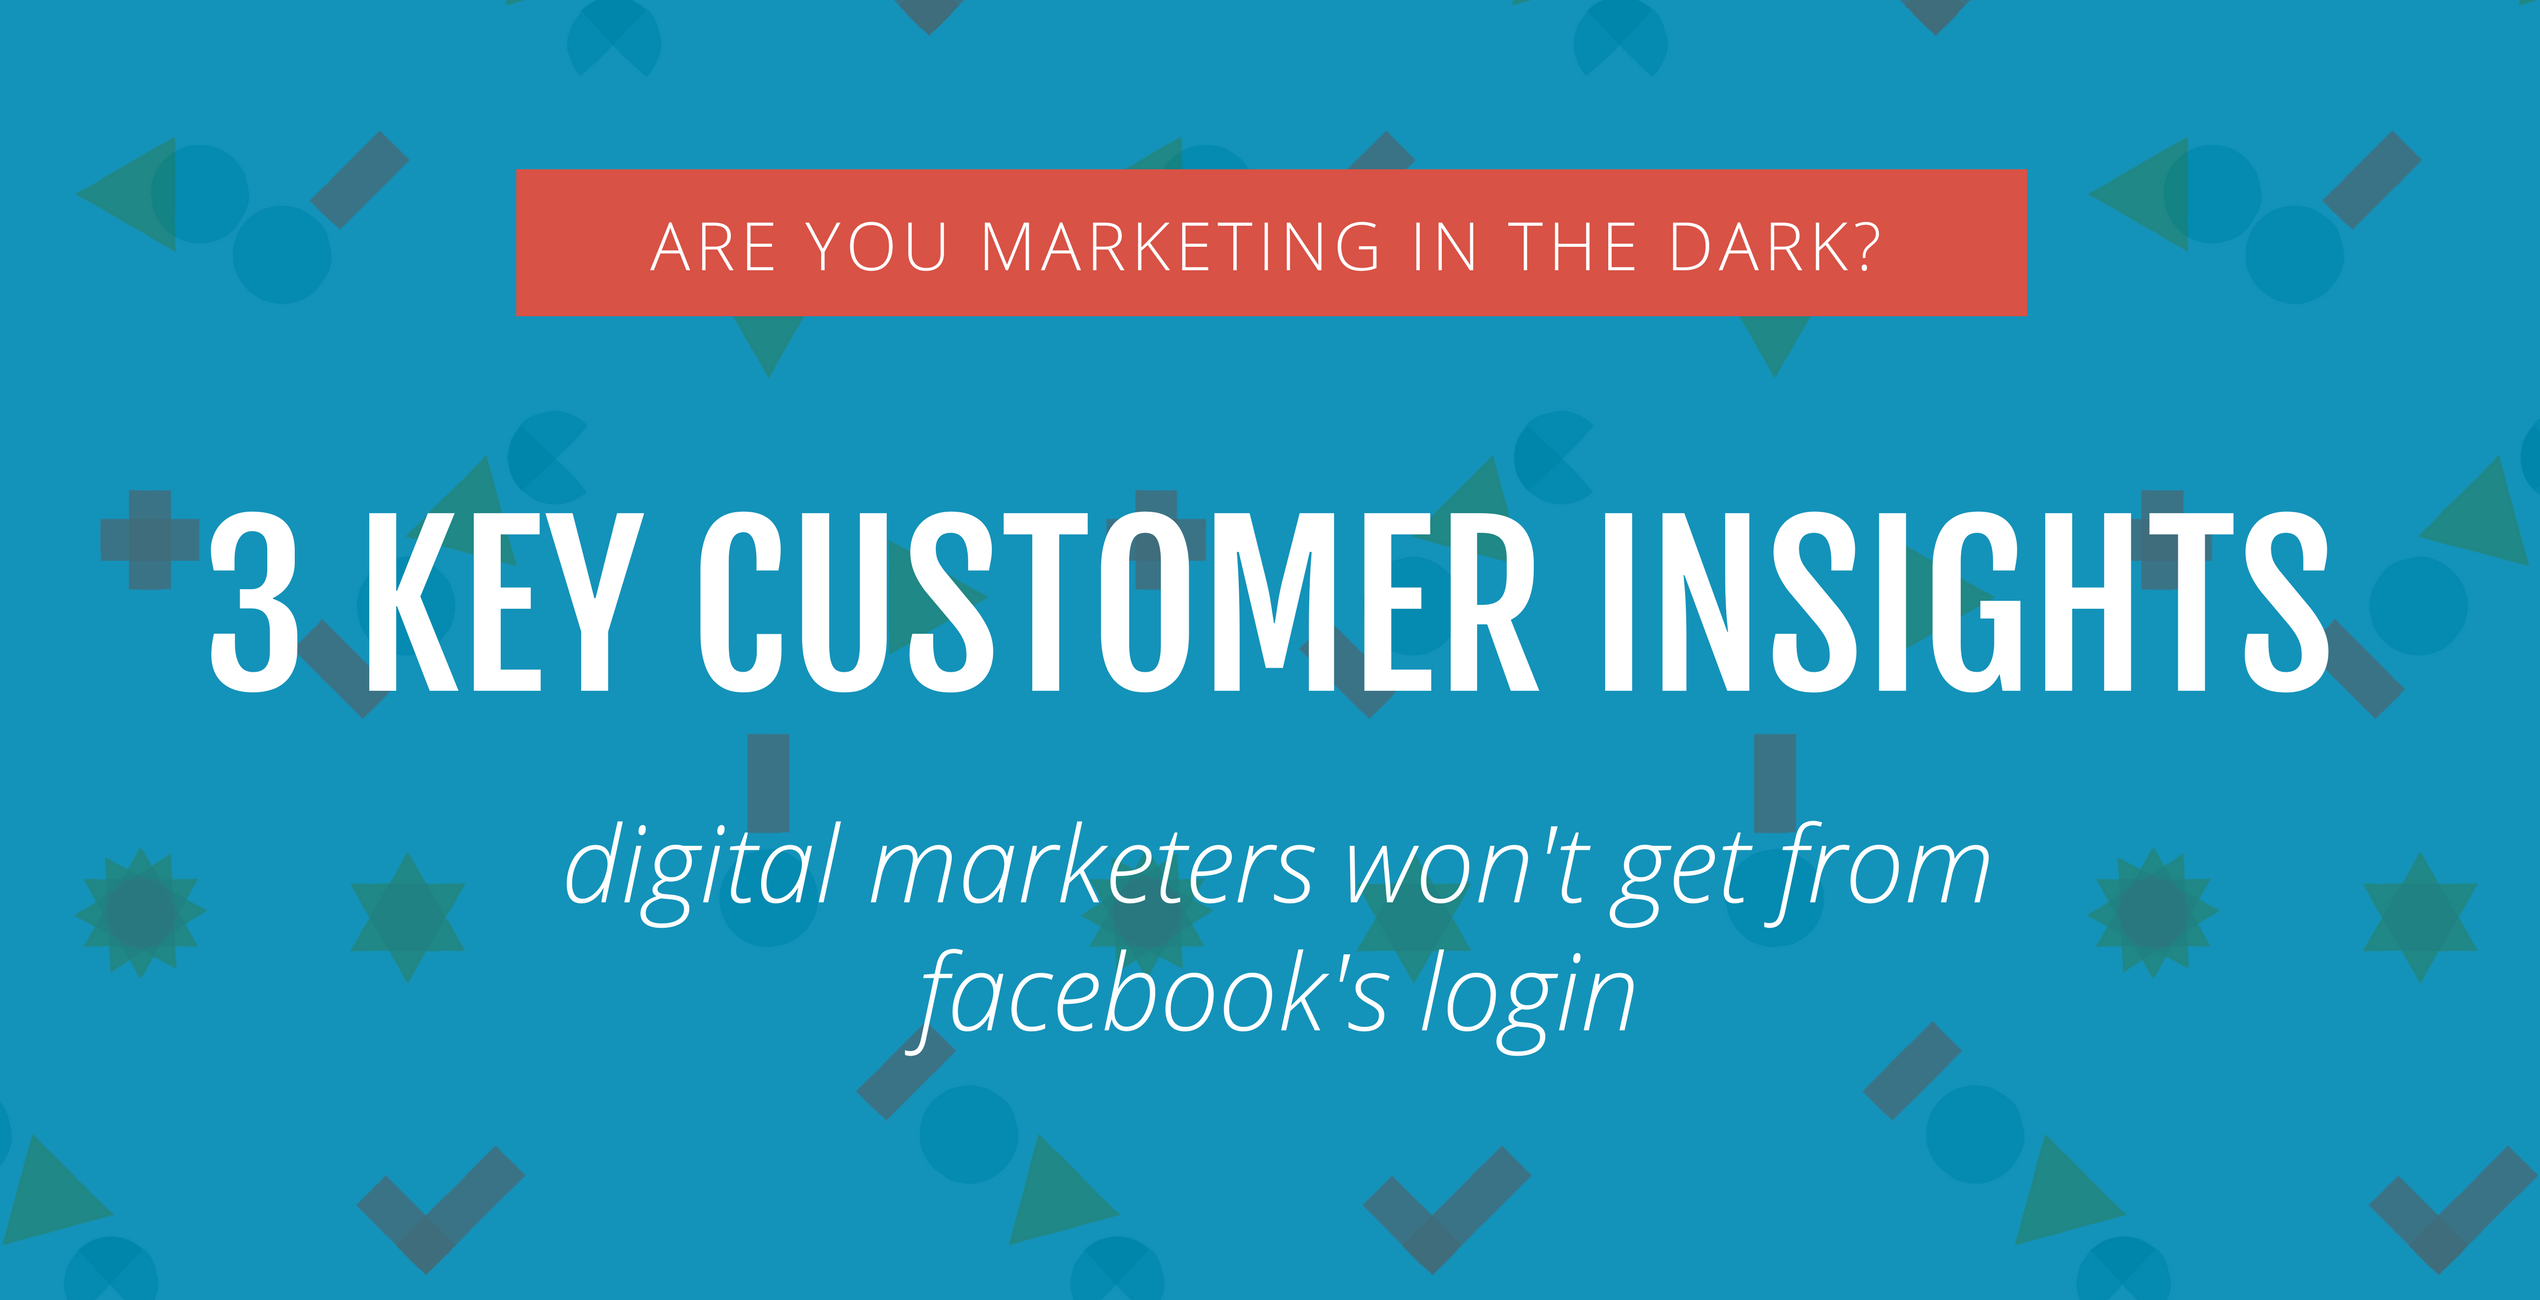 Are you marketing in the dark? 3 key customer insights digital marketers won't get from Facebook's social login.